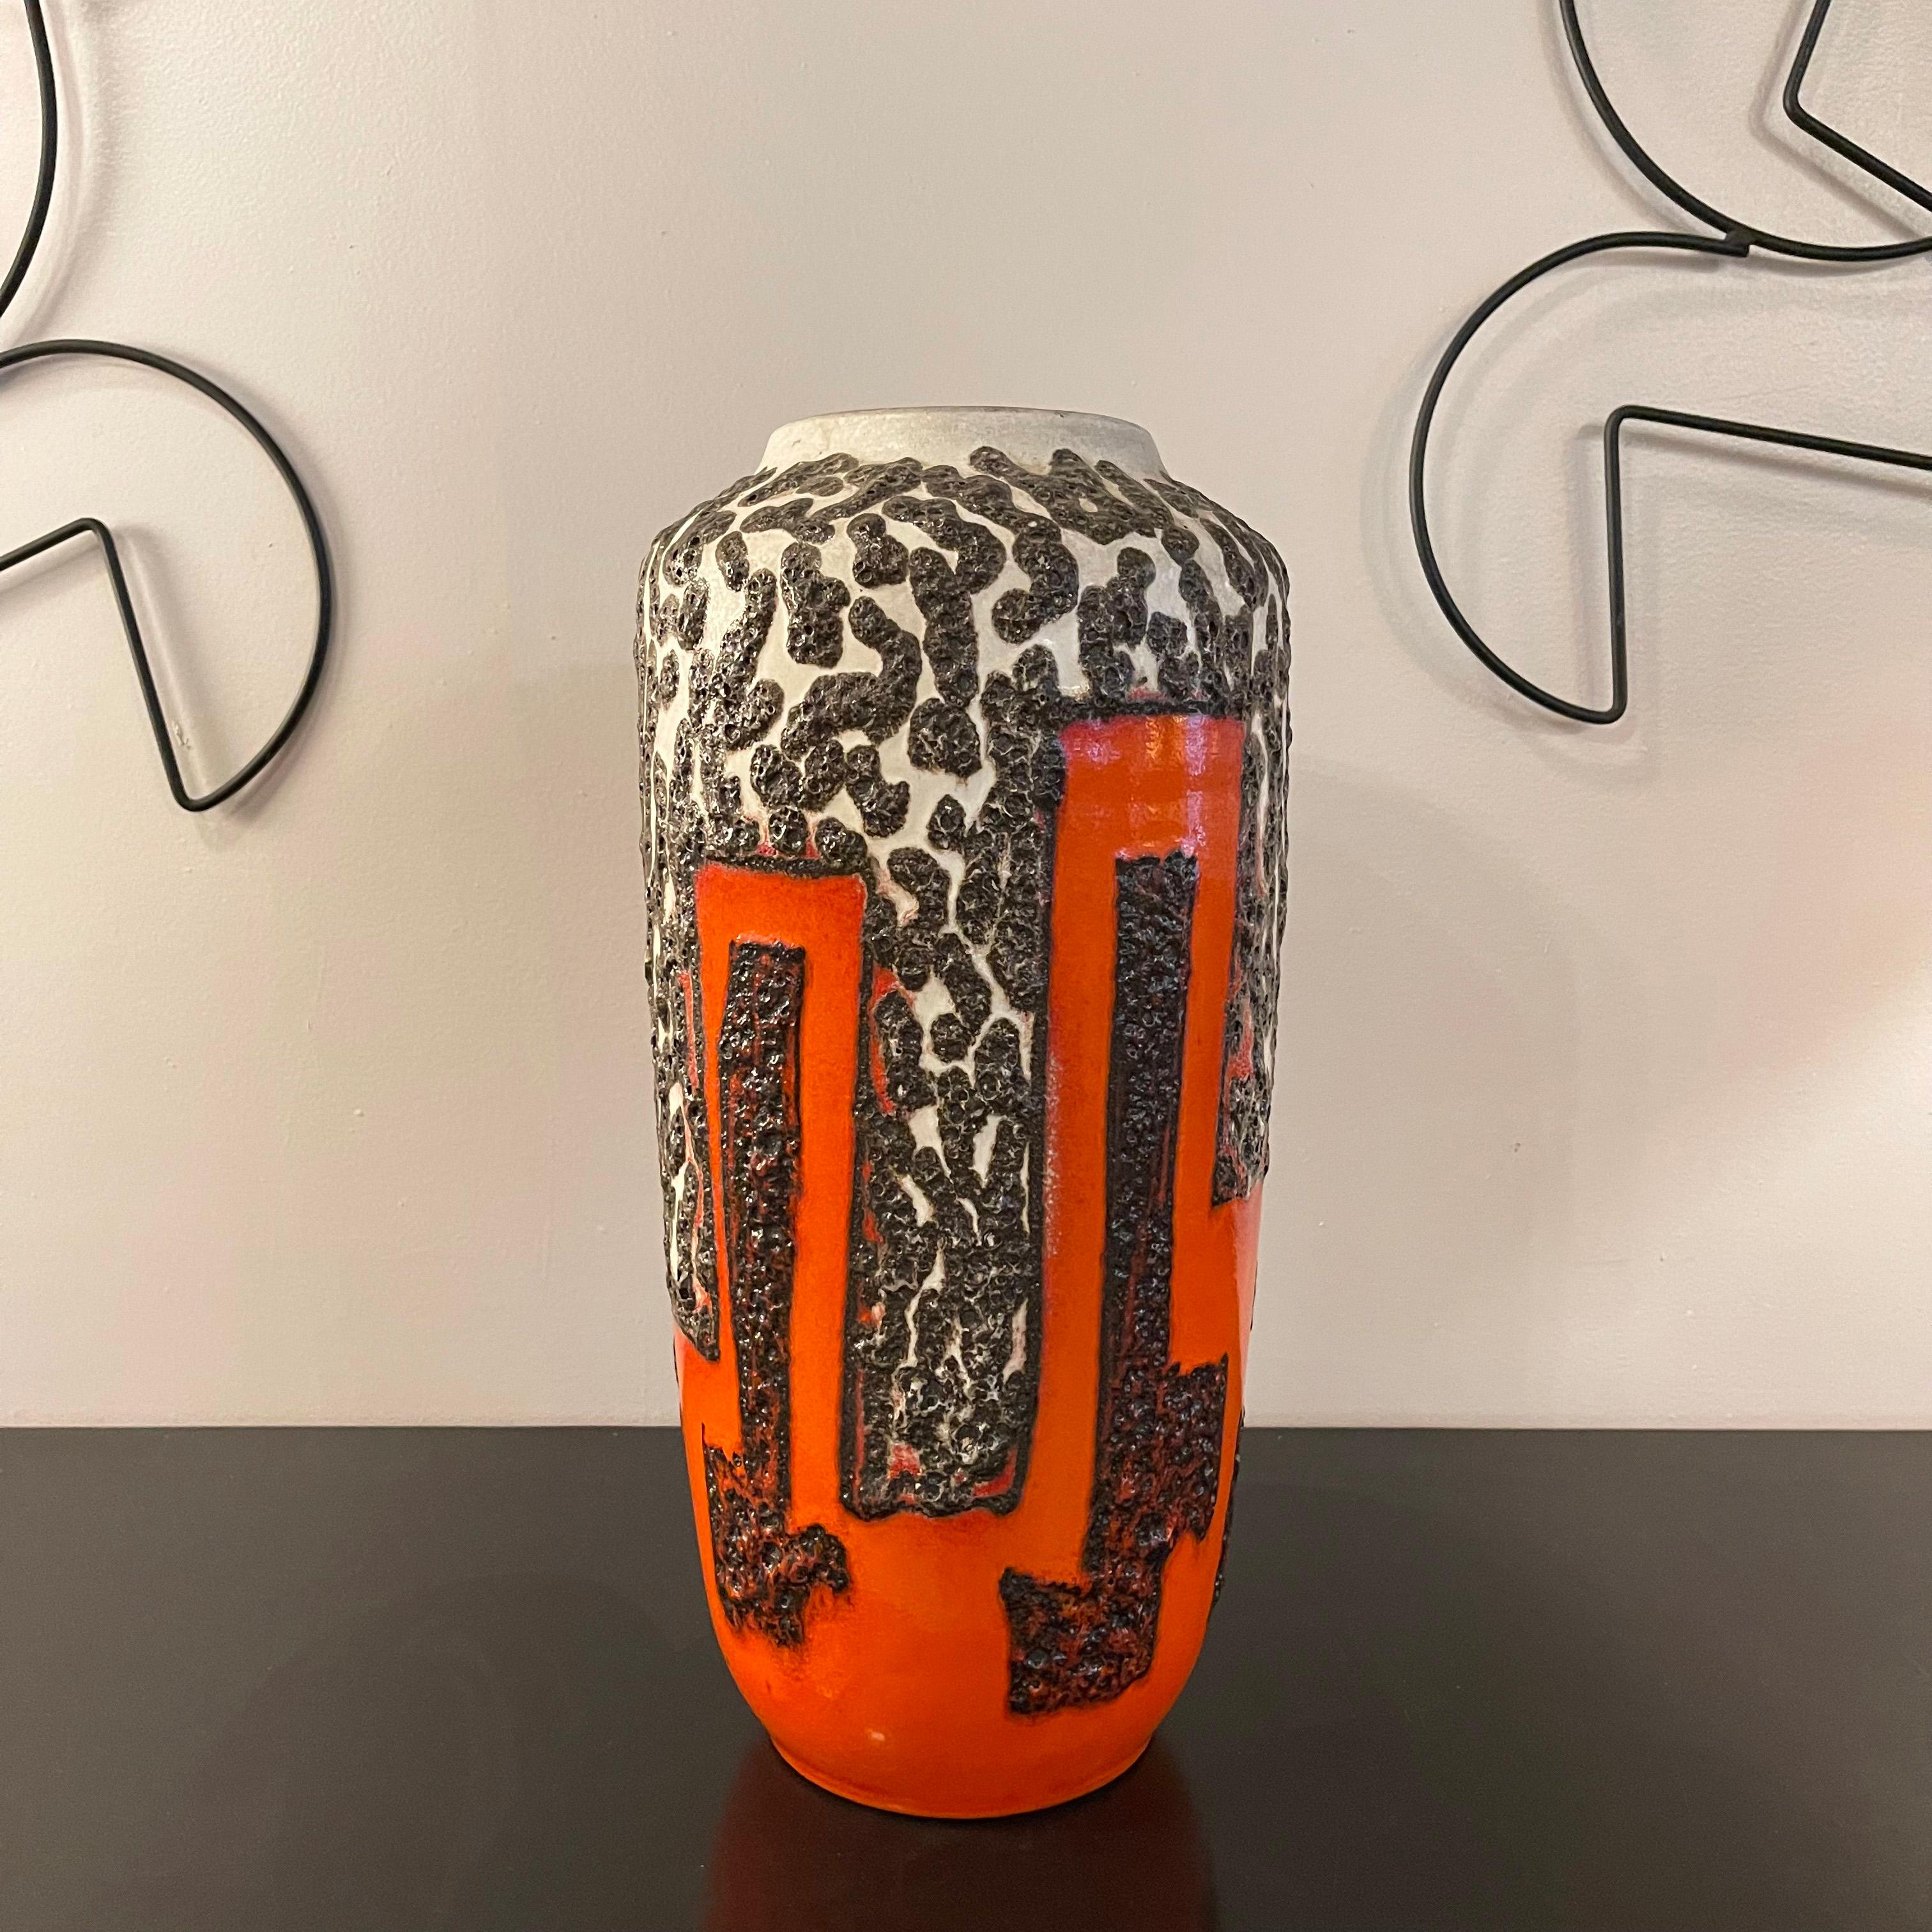 Large, statuesque, West German, mid century modern, Fat Lava art pottery vase by Scheurich Keramik features a striking, black, white and orange, brutalist glaze. The mouth opening measures 4.5 inches.